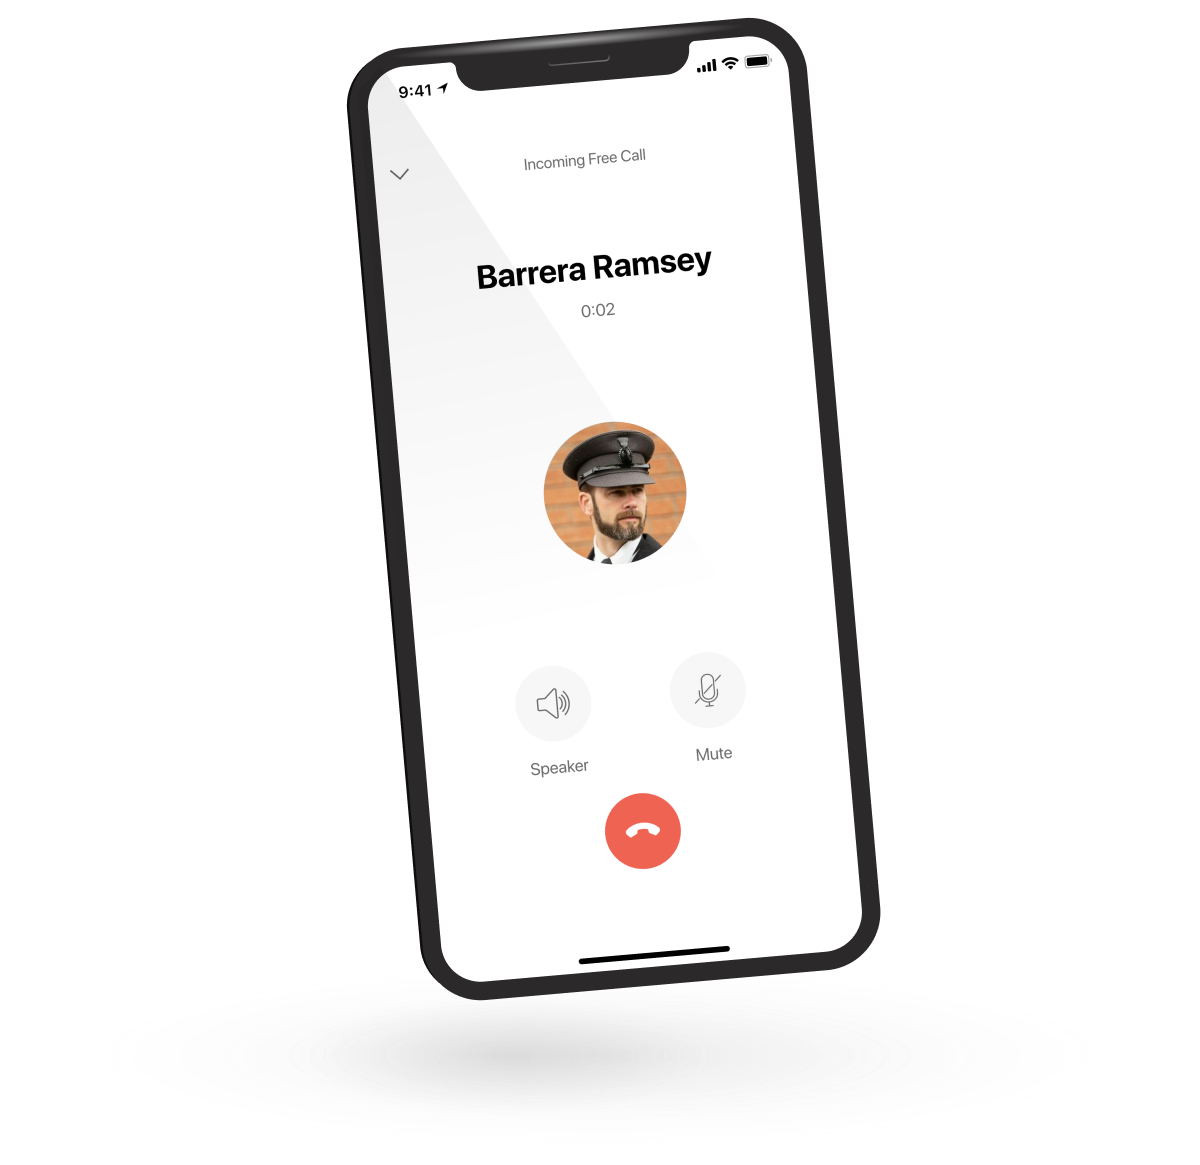 App screenshot, showing an incoming call from driver.